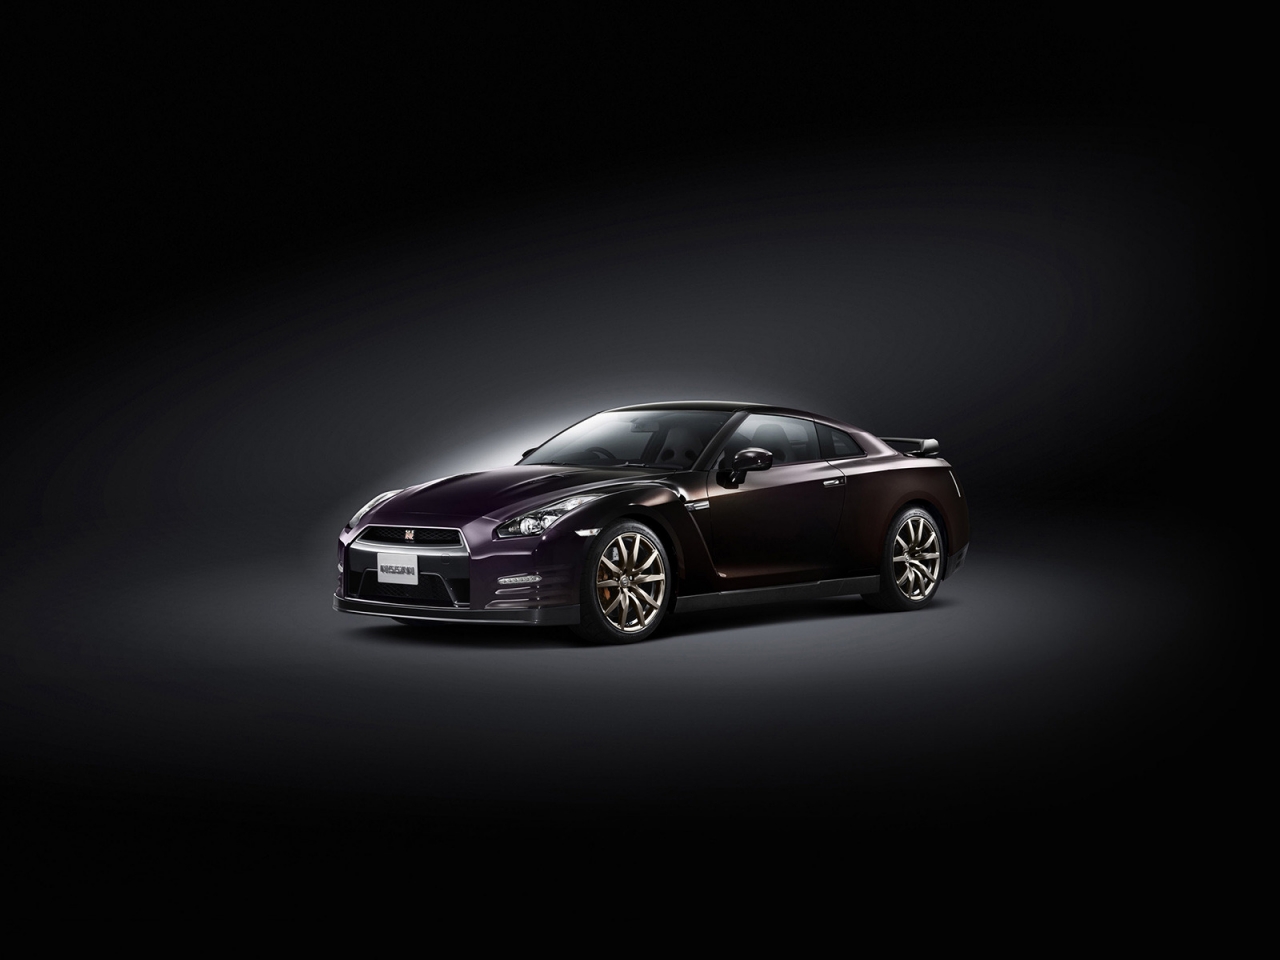 Nissan GT-R Special Edition 2014 for 1280 x 960 resolution